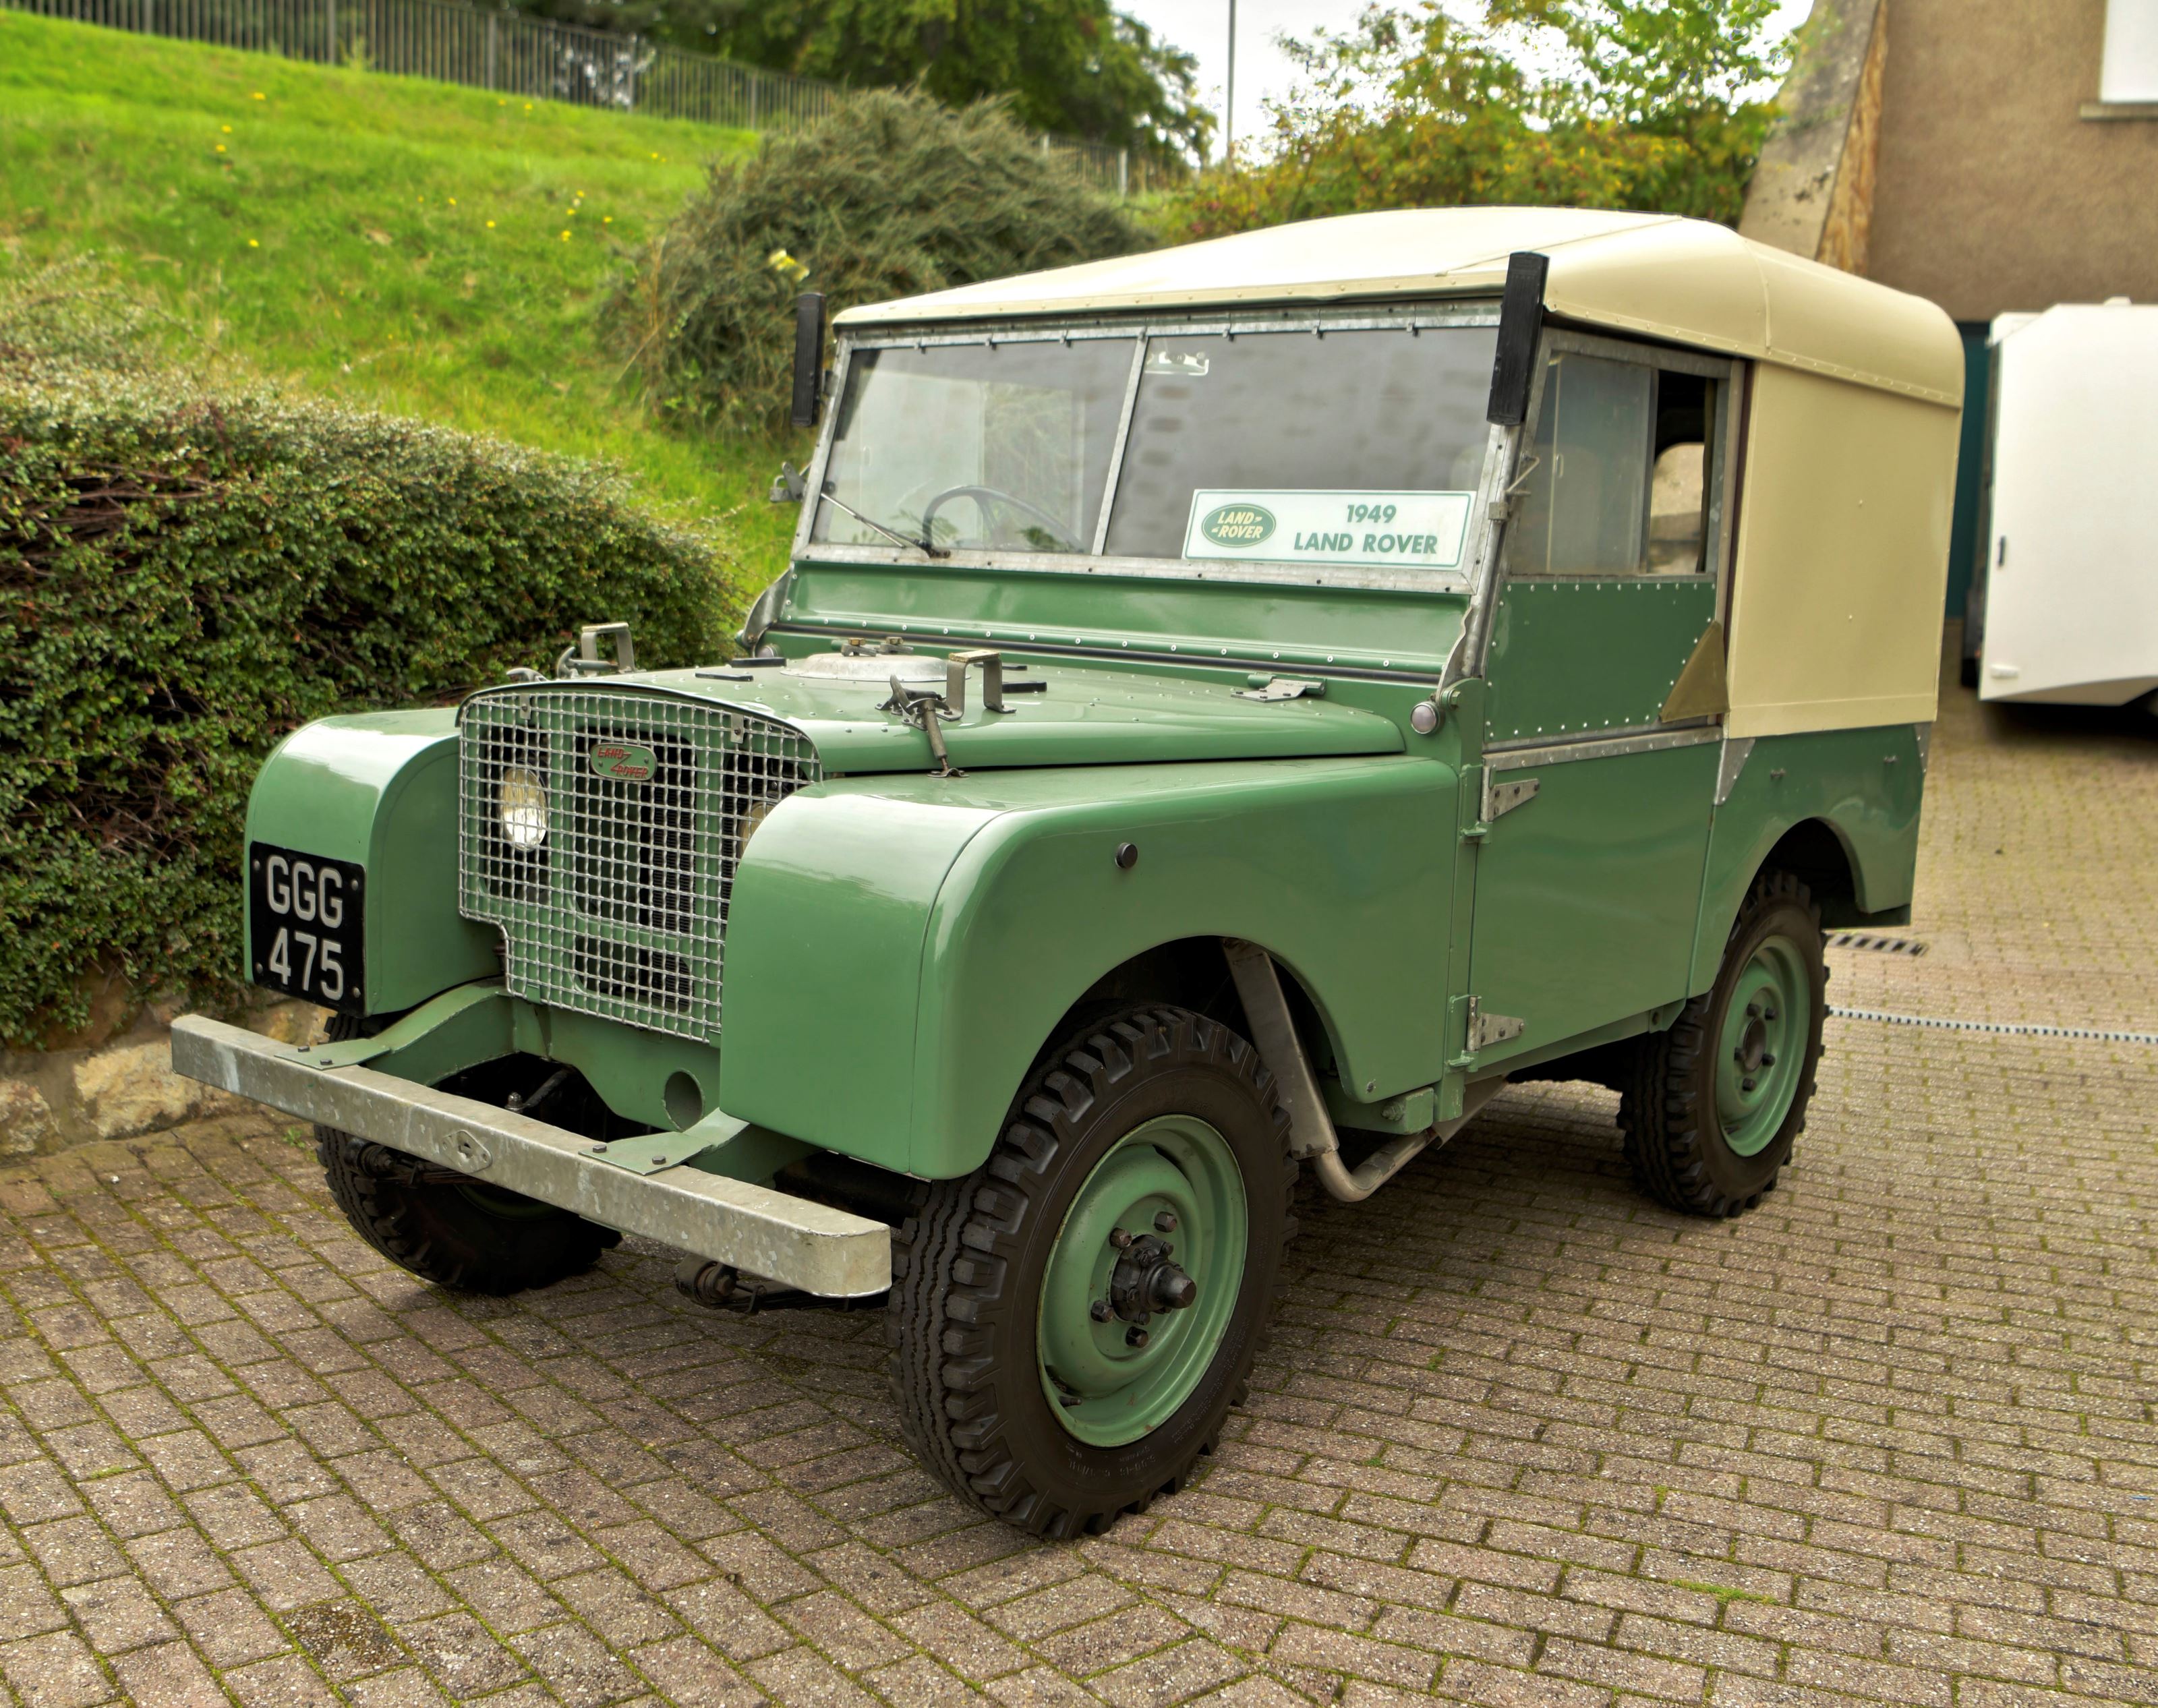 Land rover series 1 swb with hard top vwpm0wh9ao9uqtesng0je